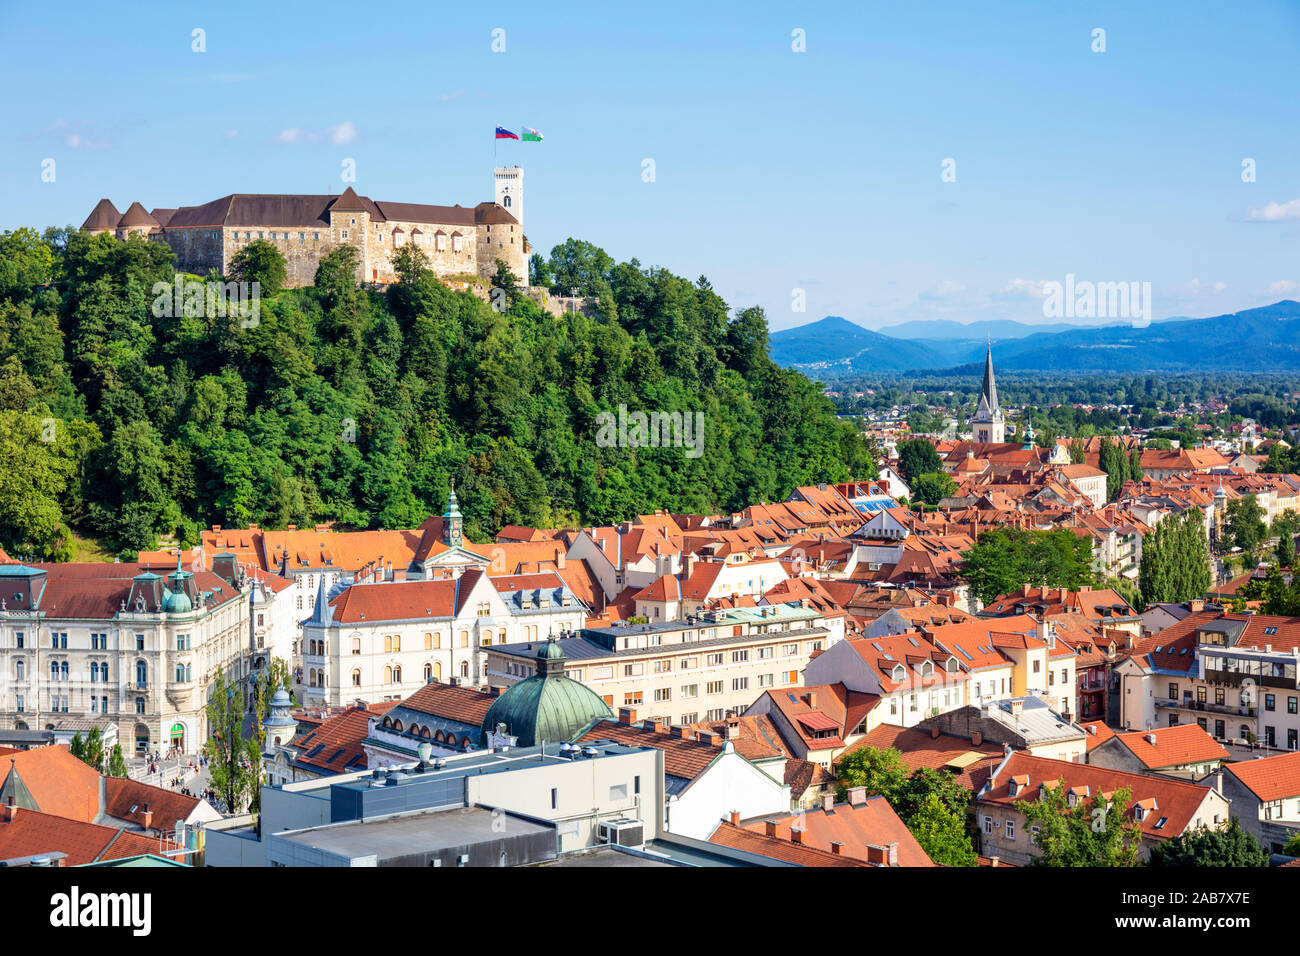 Ljubljana skyline with view of the city and Ljubljana Castle complex on Castle Hill, Ljubljana, Slovenia, Europe Stock Photo